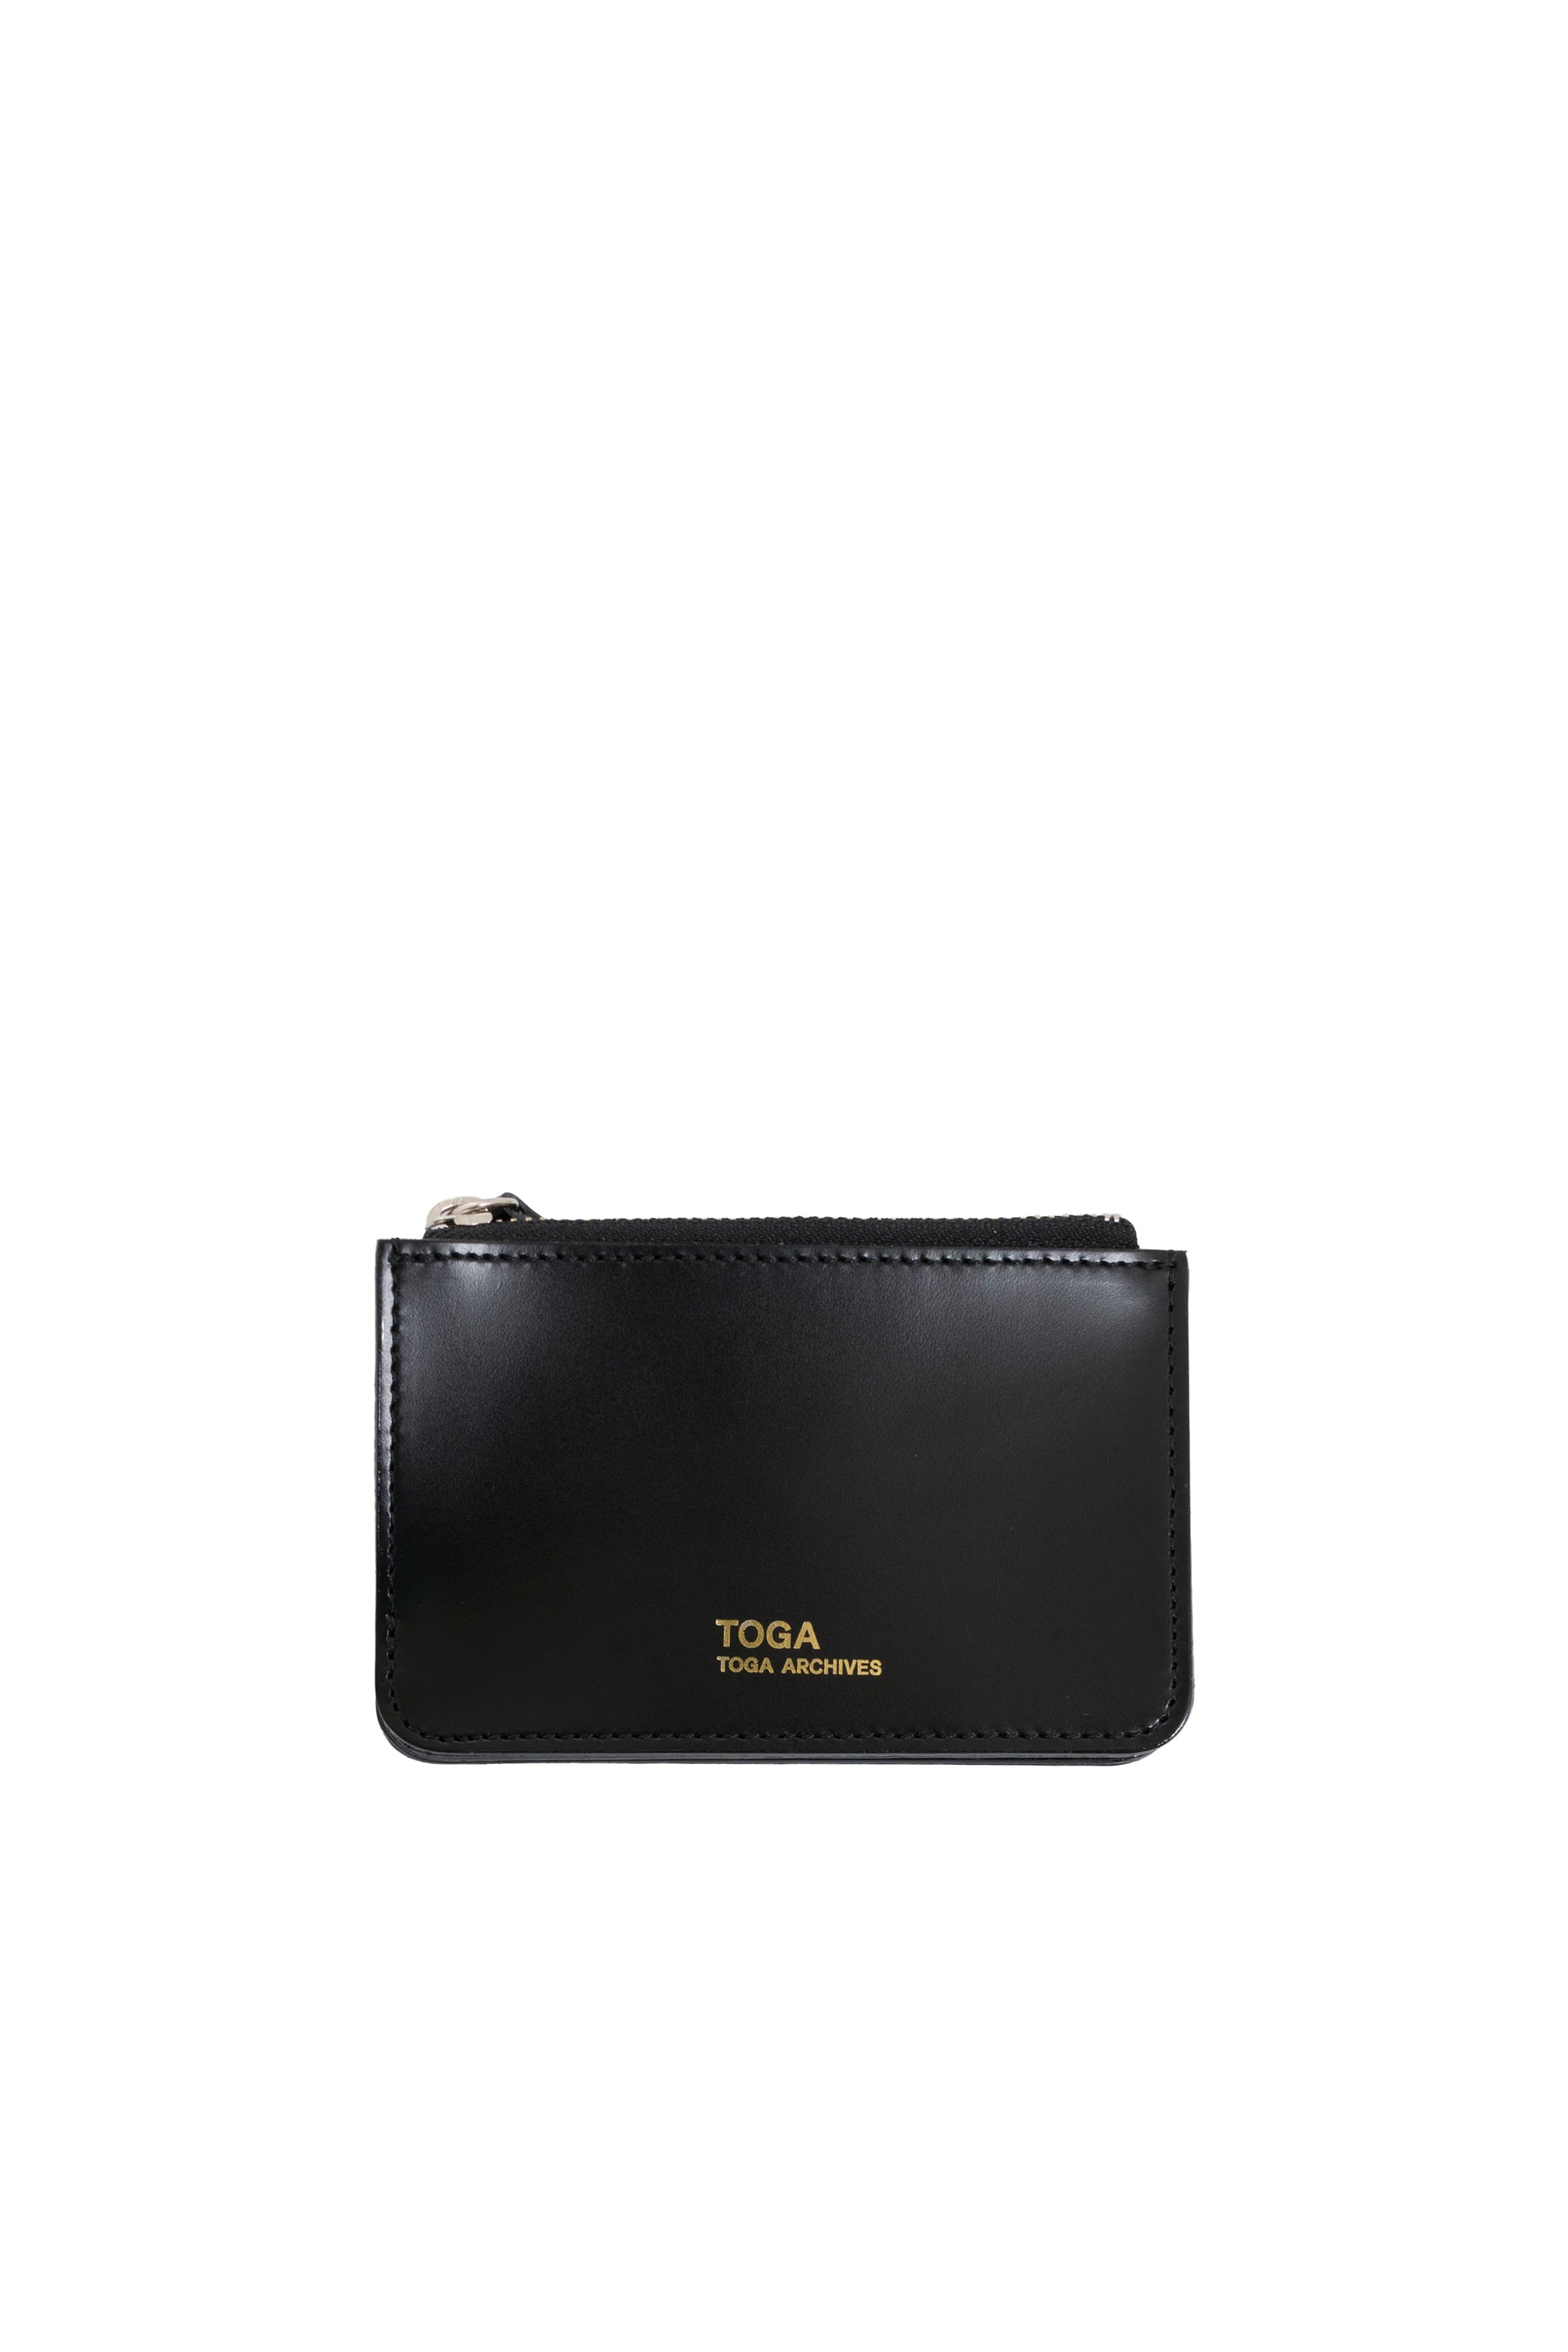 TOGA SS23 LEATHER WALLET SMALL / BLK -NUBIAN